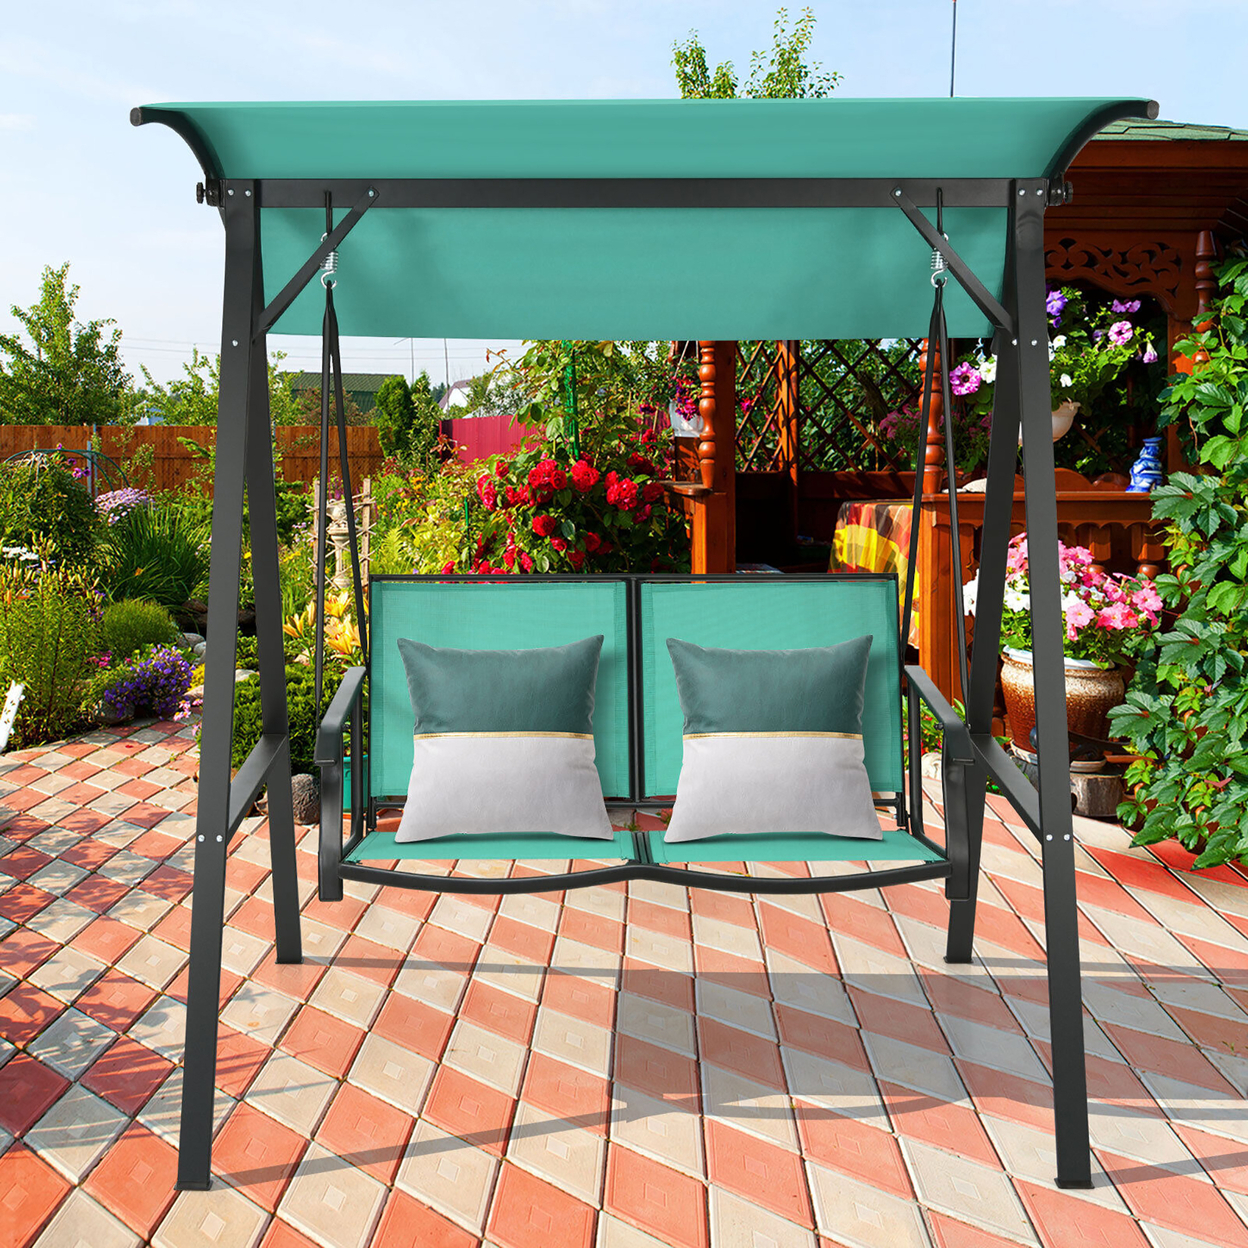 2-Person Outdoor Patio Porch Swing Chair W/ Adjustable Canopy Turquoise